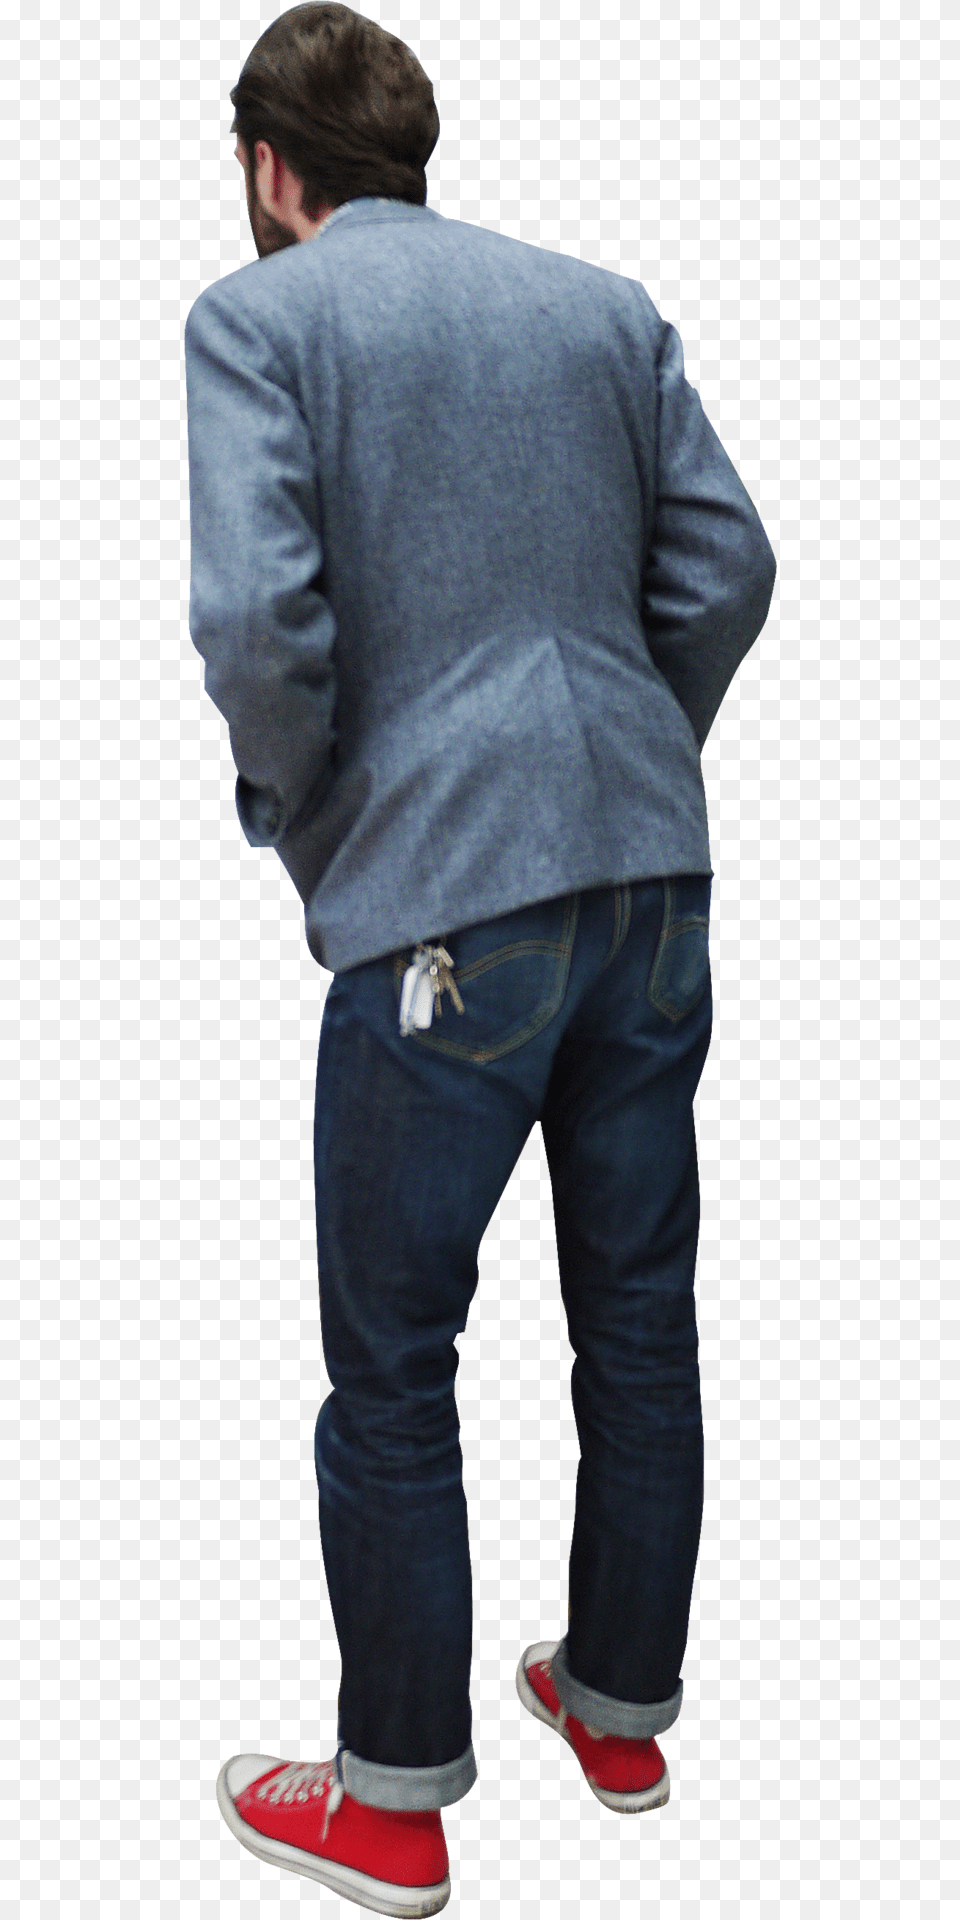 People Back Cut Out Cut Out People Back, Clothing, Shoe, Footwear, Jeans Free Png Download